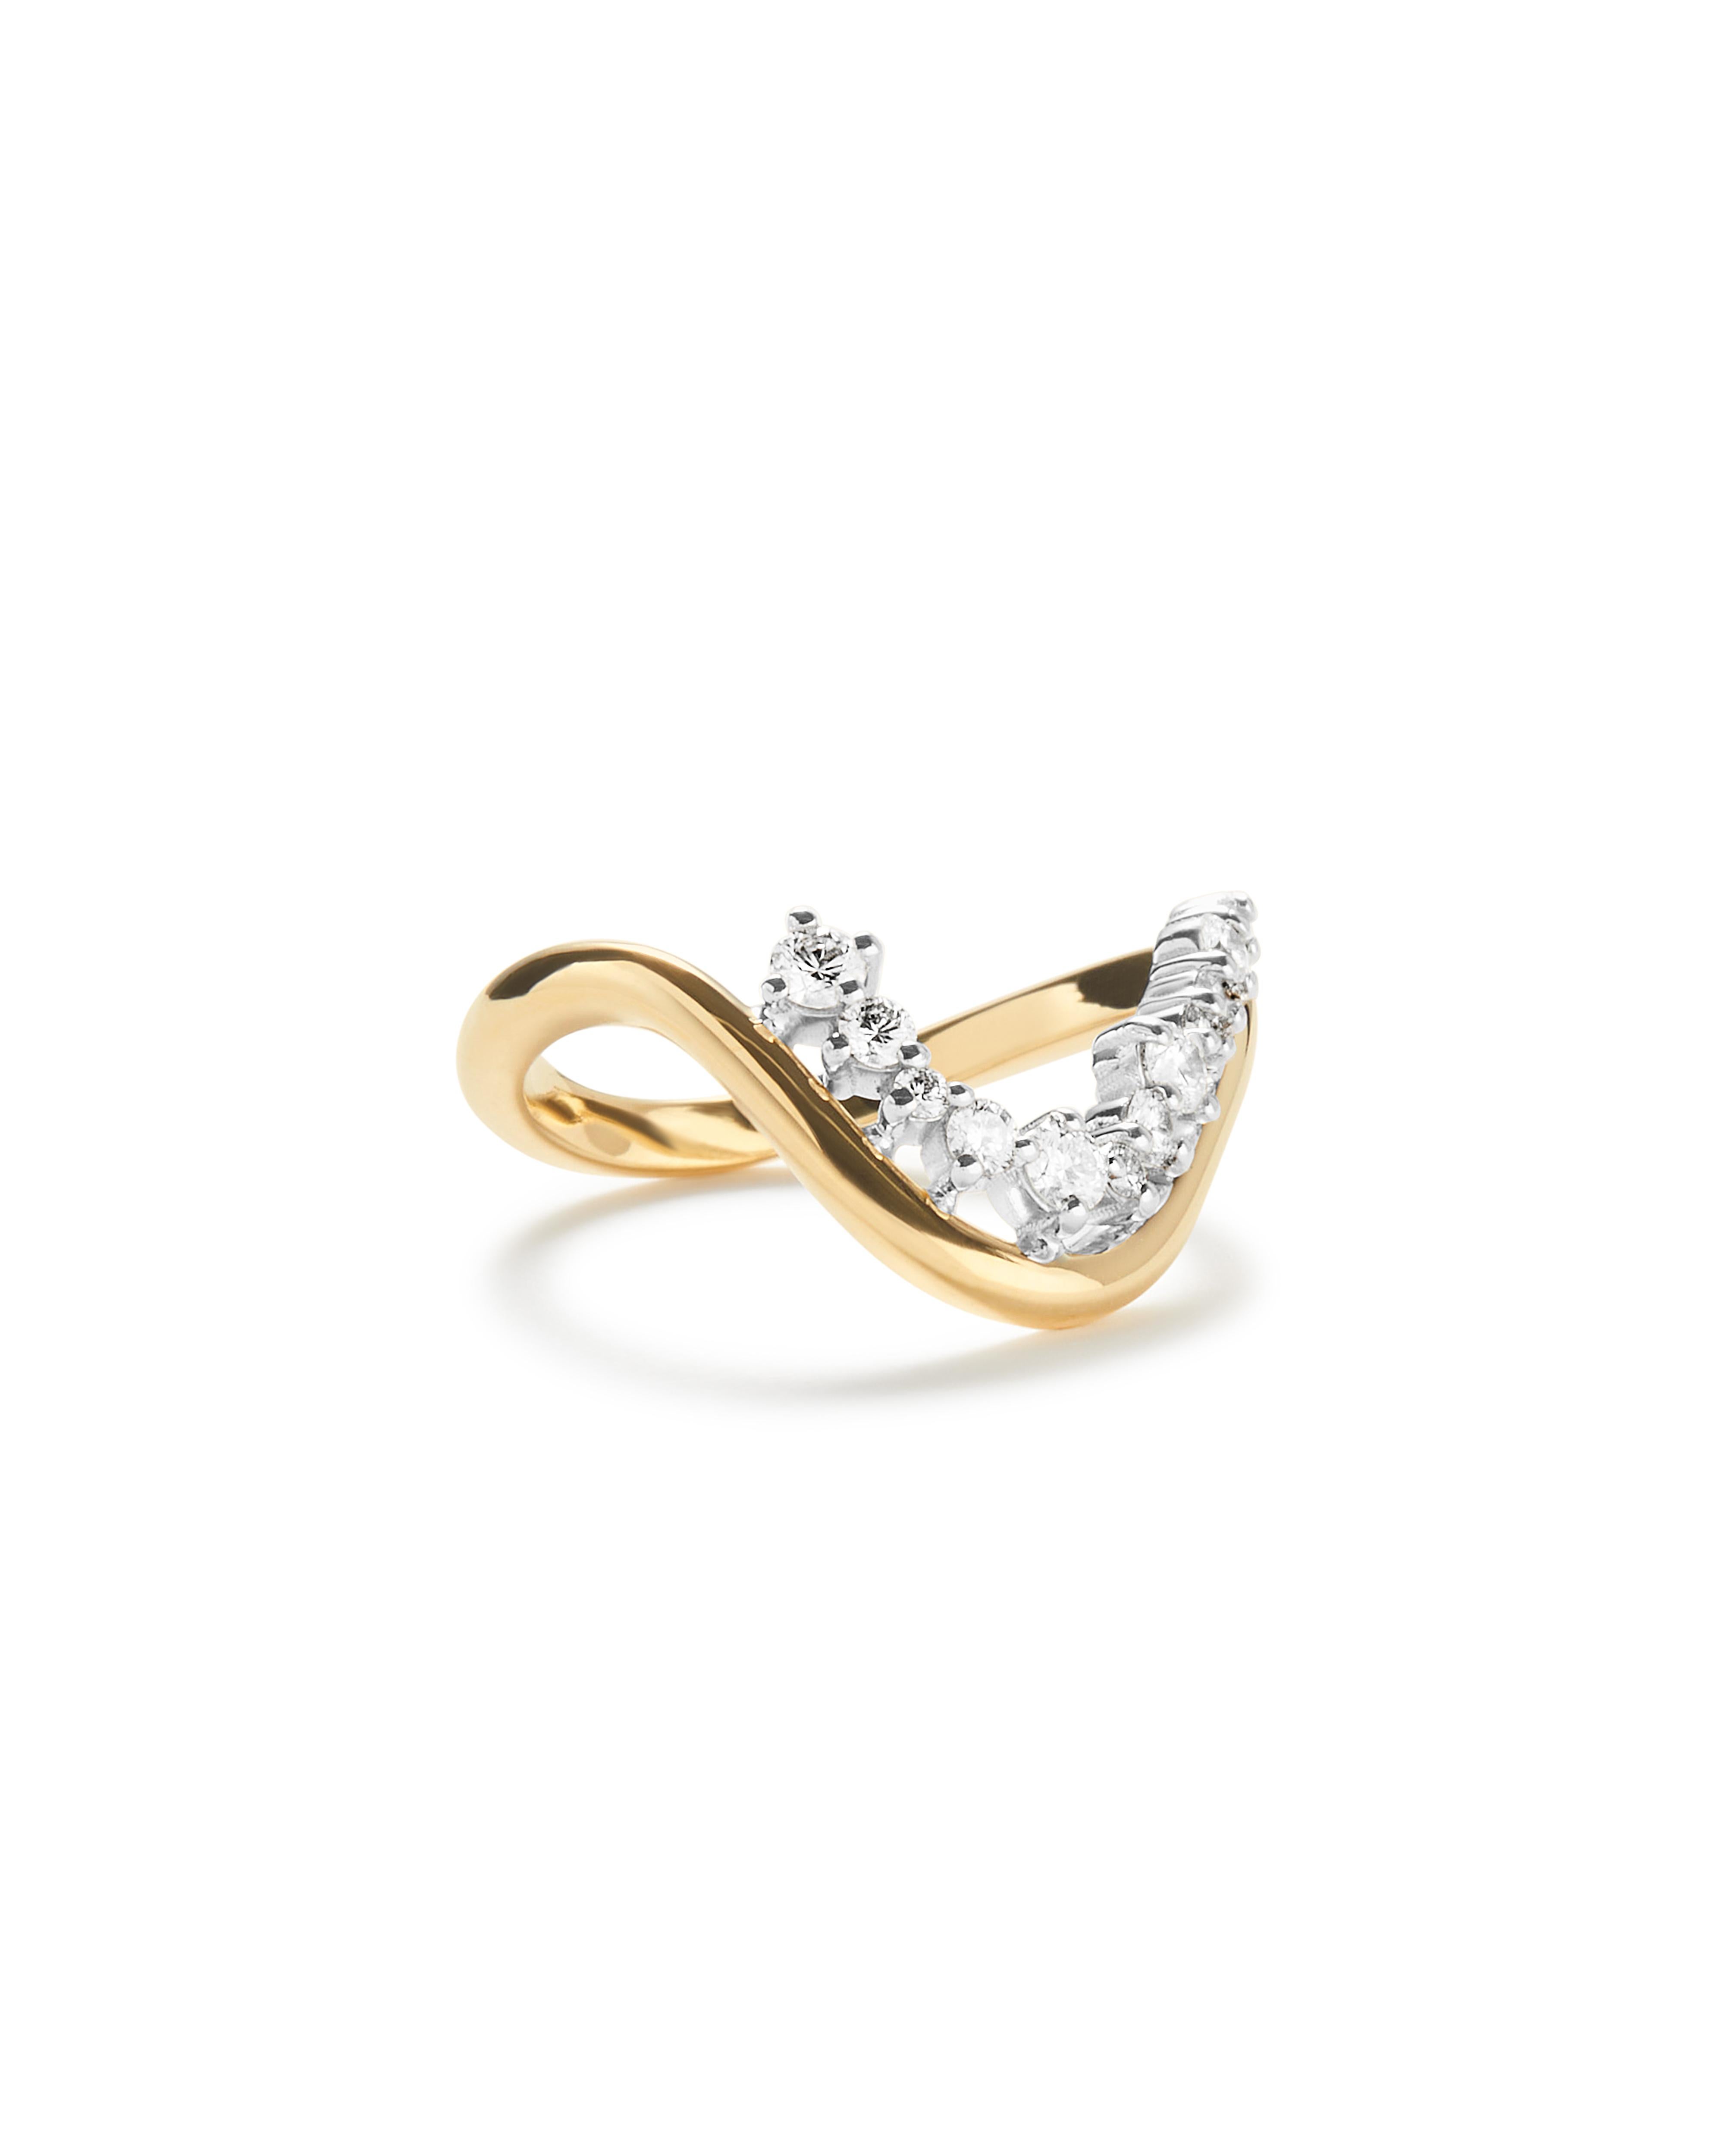 For Sale:  Rosario Navia Mara Large Curved Ring I in 18K Gold, Platinum, and Diamonds 2